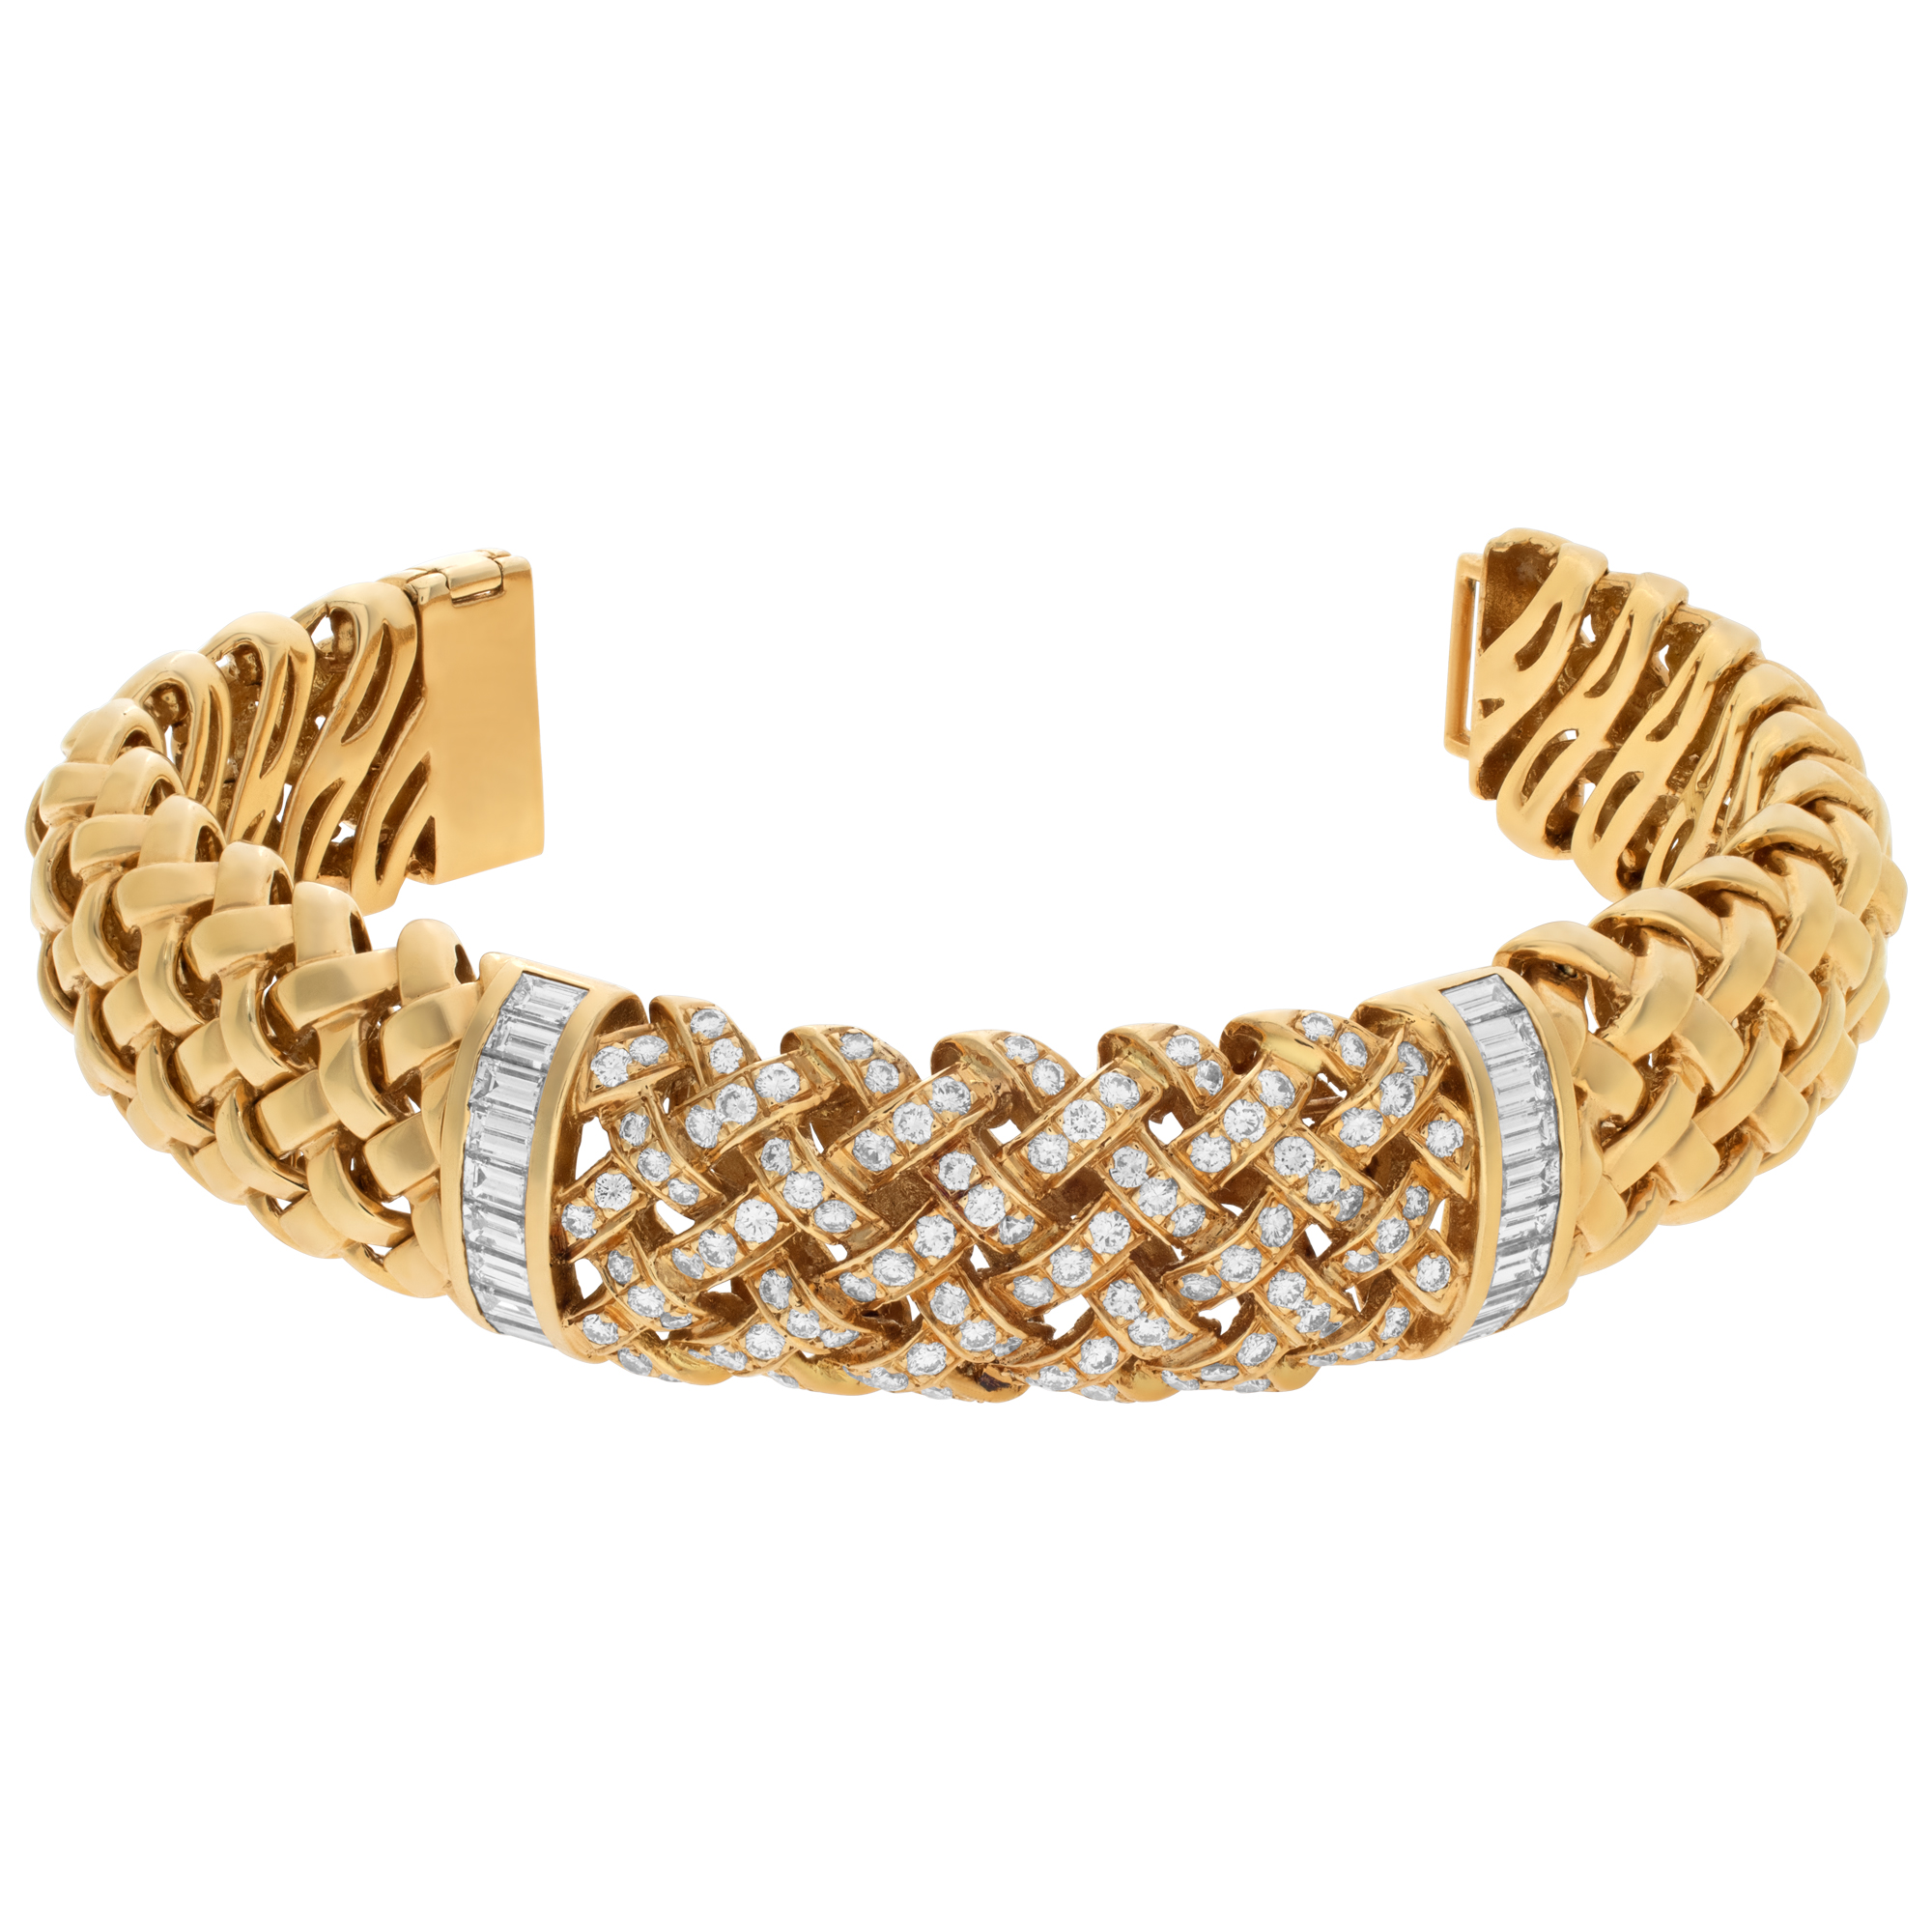 Tiffany & Co. VANNERIE Collection bracelet in 18K yellow gold image 7